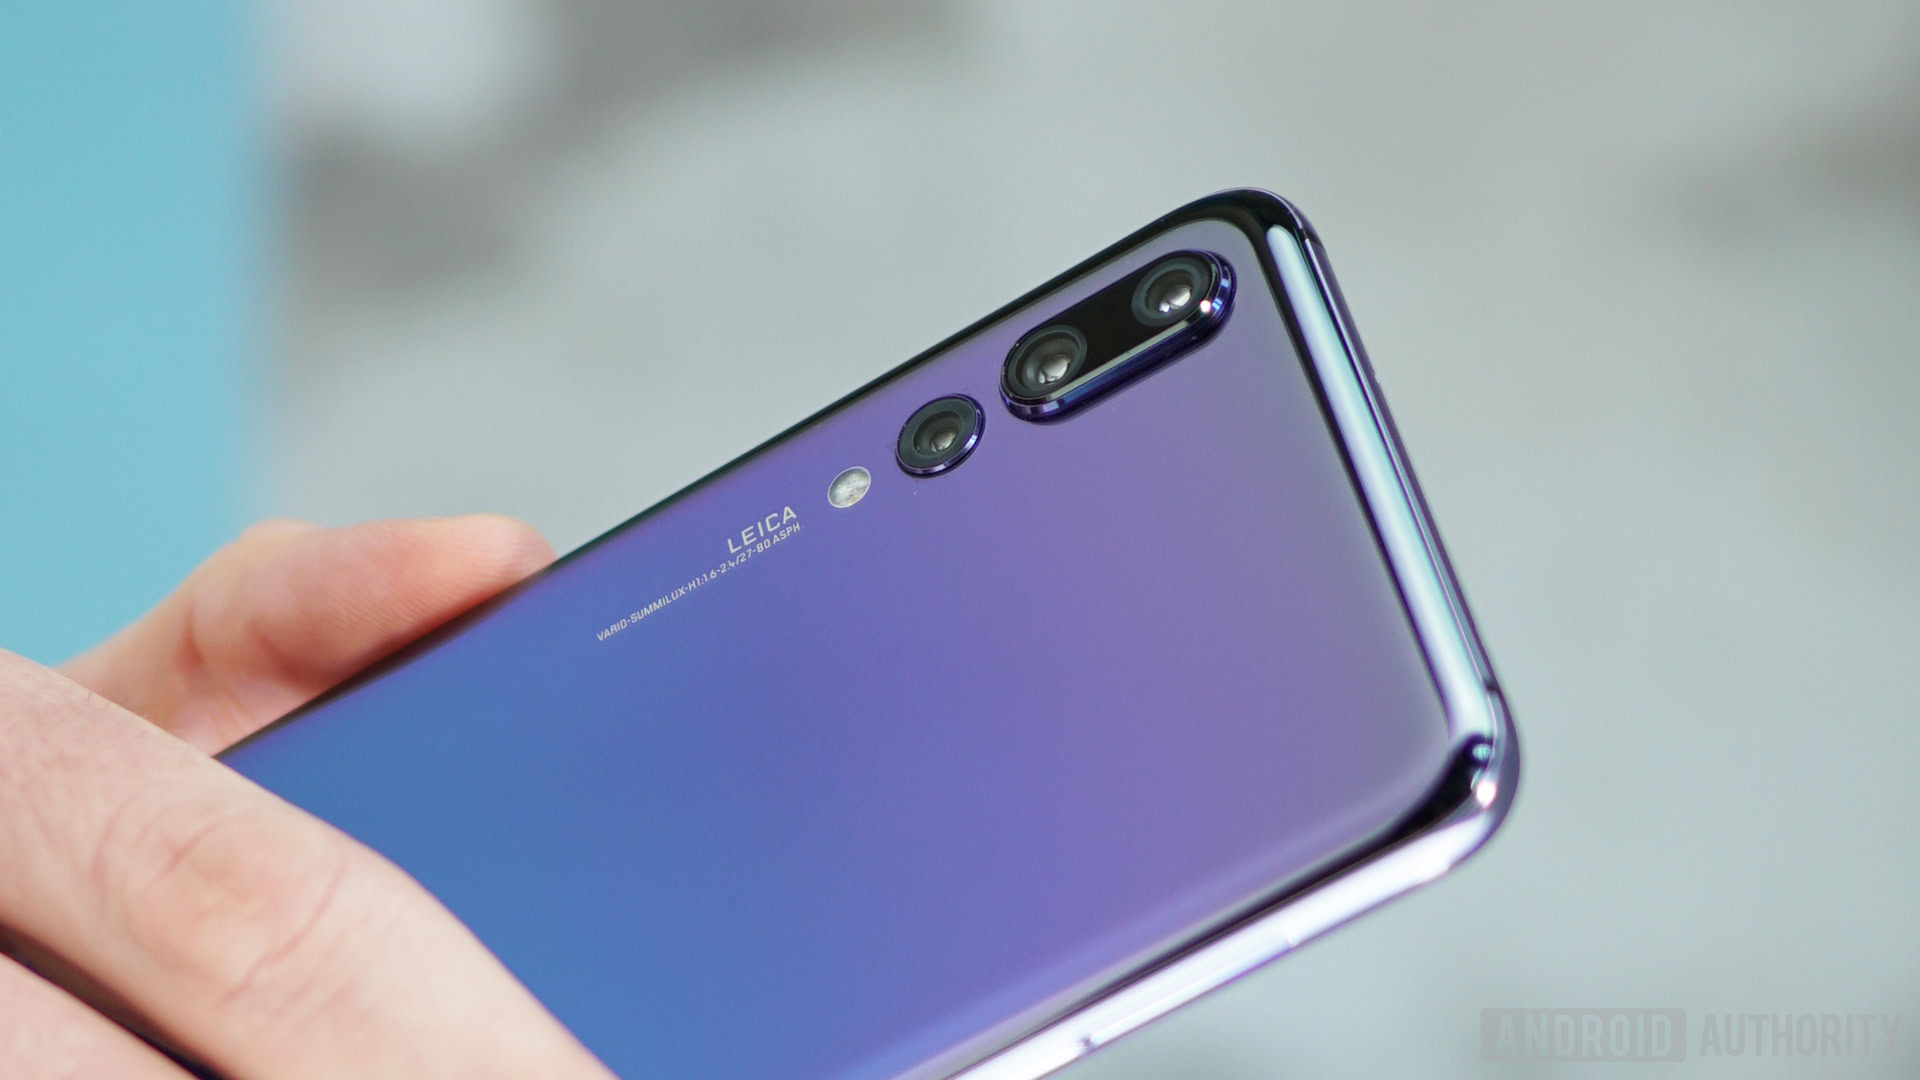 HUAWEI P20 Pro Review - Android Authority